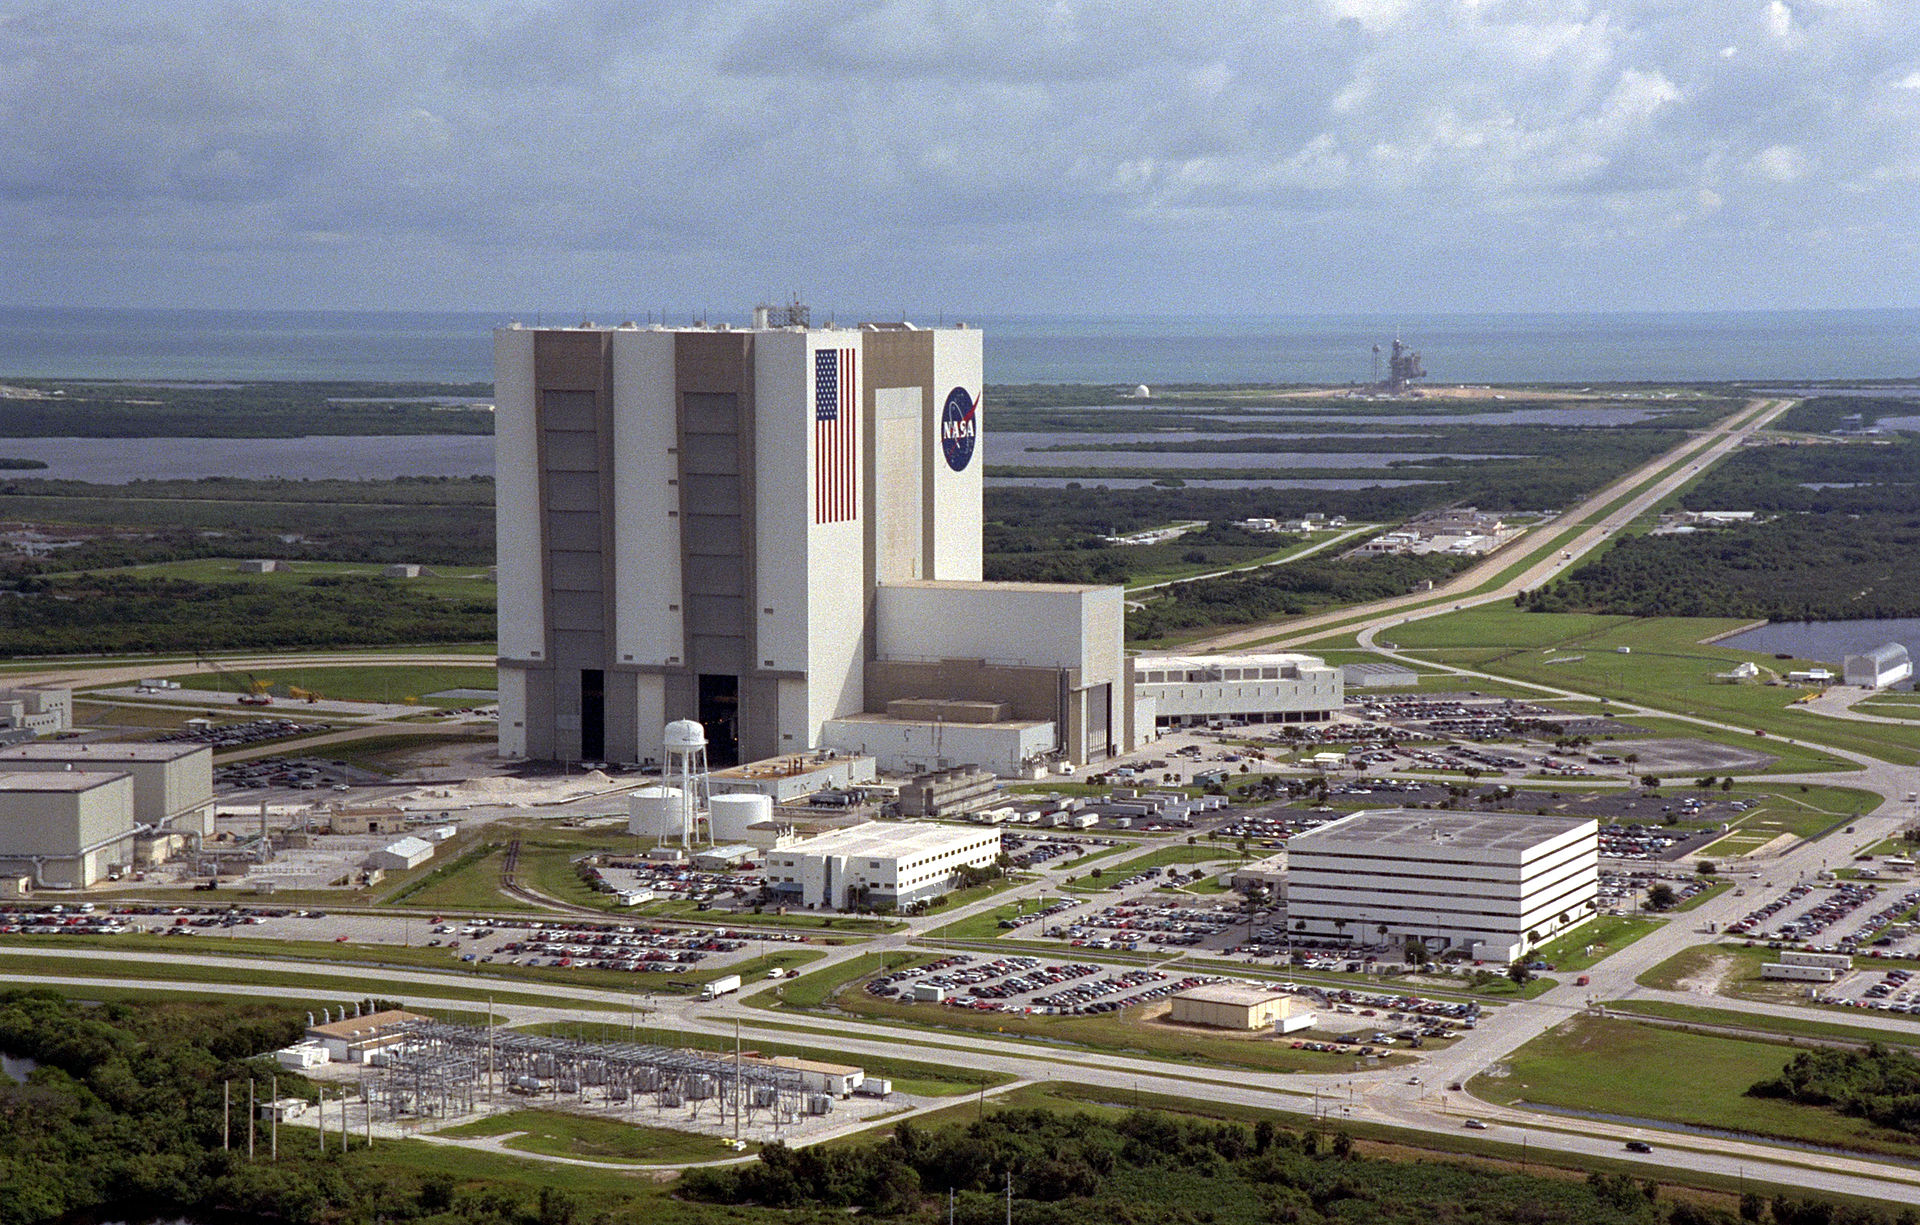 Launch Complex 39 and the Vehicle Assembly Building (VAB) at NASA's Kennedy Space Center are situated ten miles north of Port Canaveral (Image: NASA) 